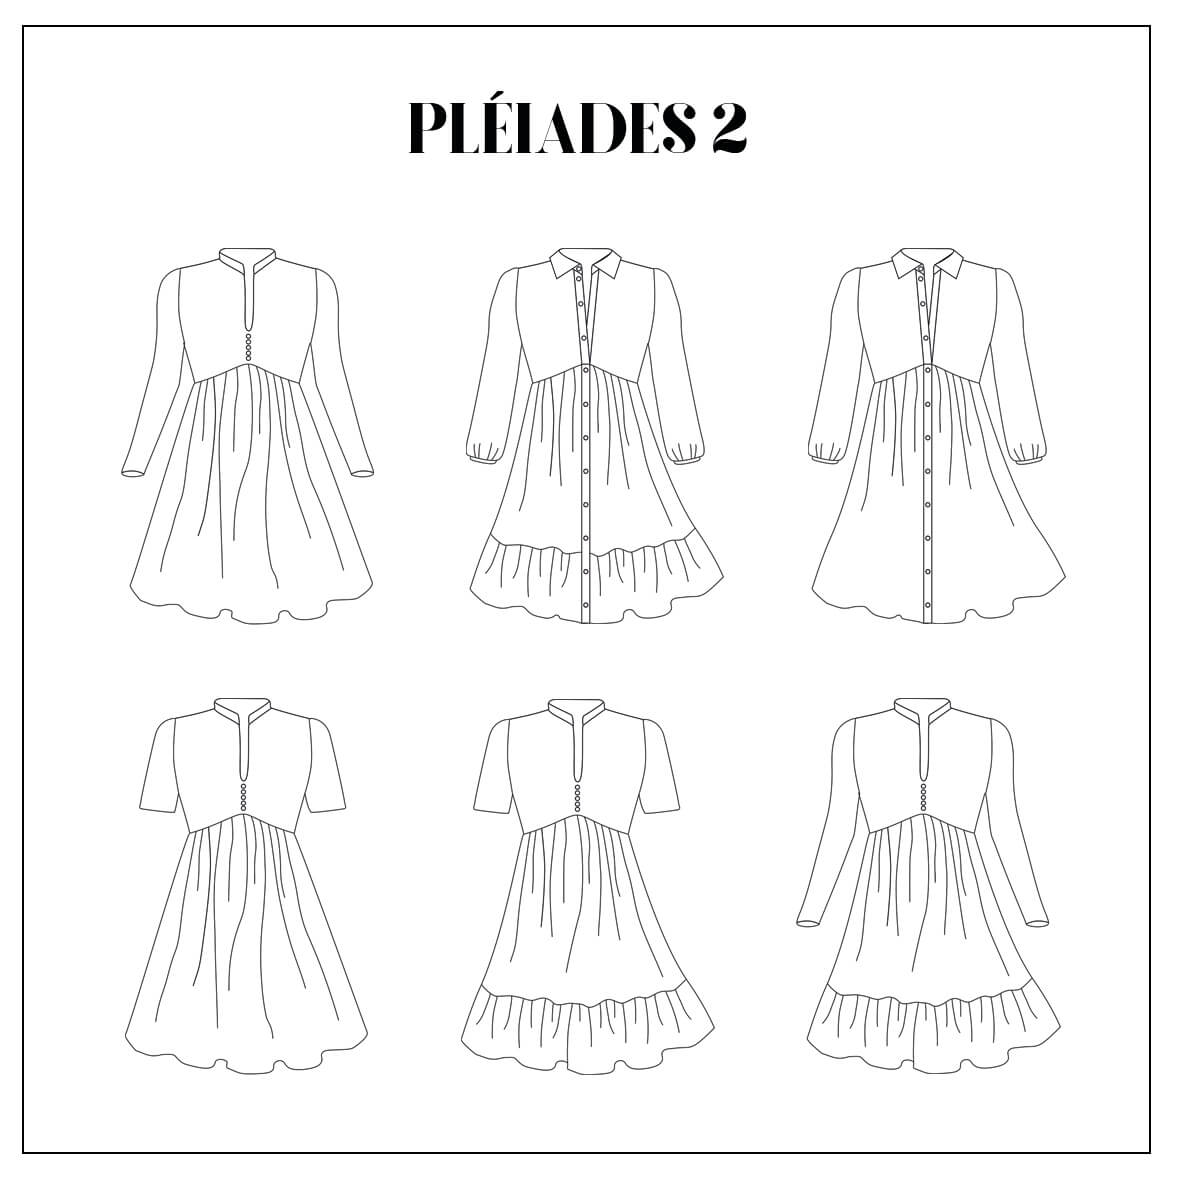 The New Pleiades 2 pattern: 3 sleeve options, a slit neckline or shirt dress options